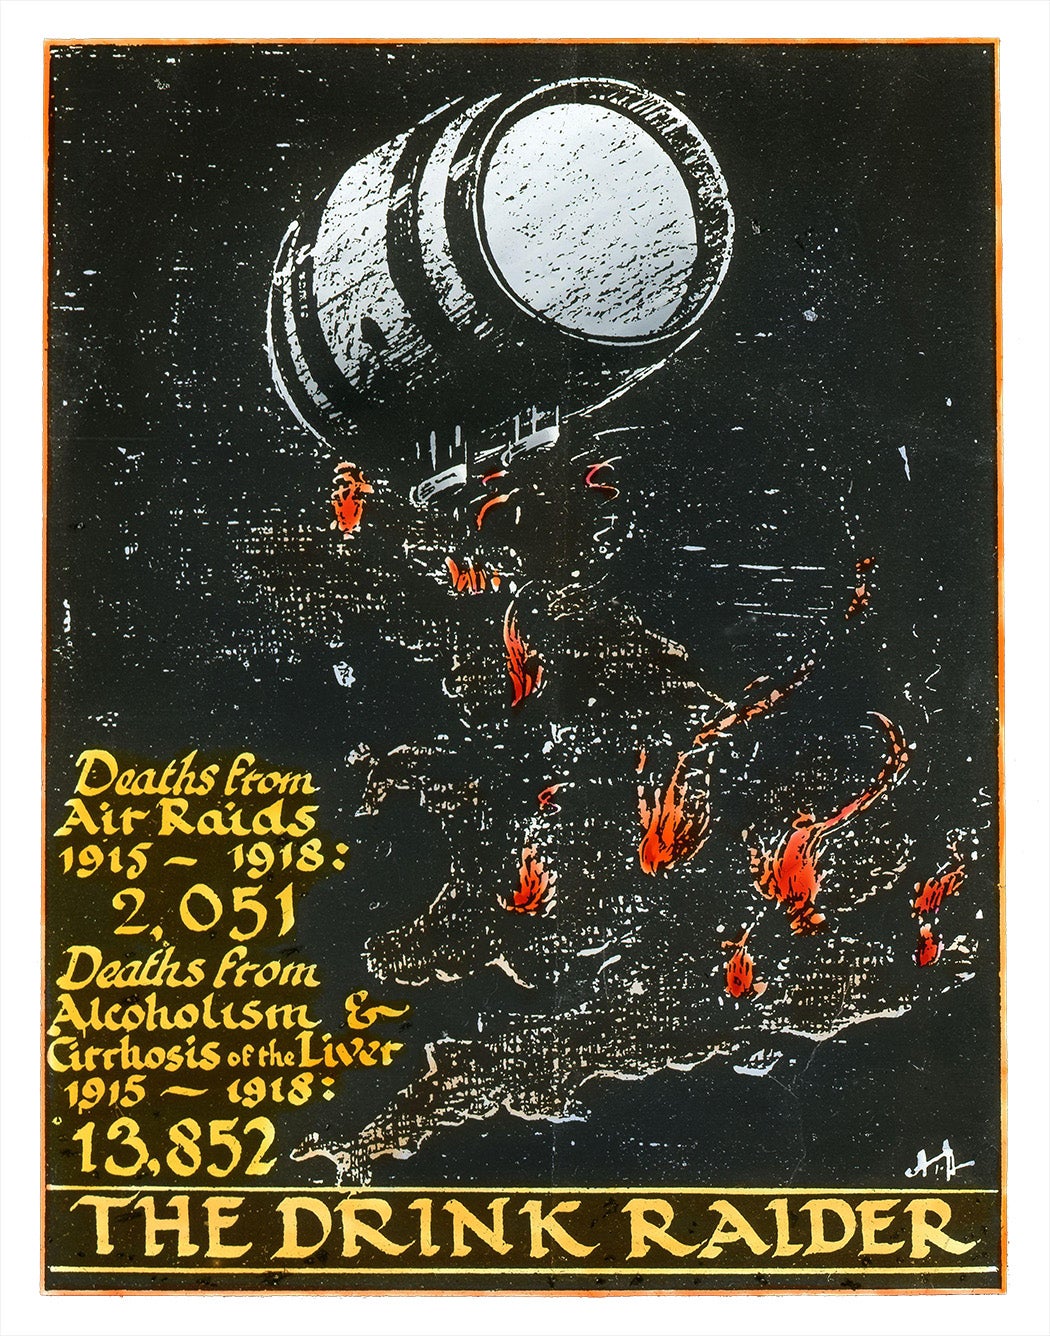 Barrel dropping firebombs from the sky. Deaths from Air Raids 1915-1918: 2,051 Deaths from Alcoholism & Cirrhosis of the Liver 1915-1918: 13,852. 